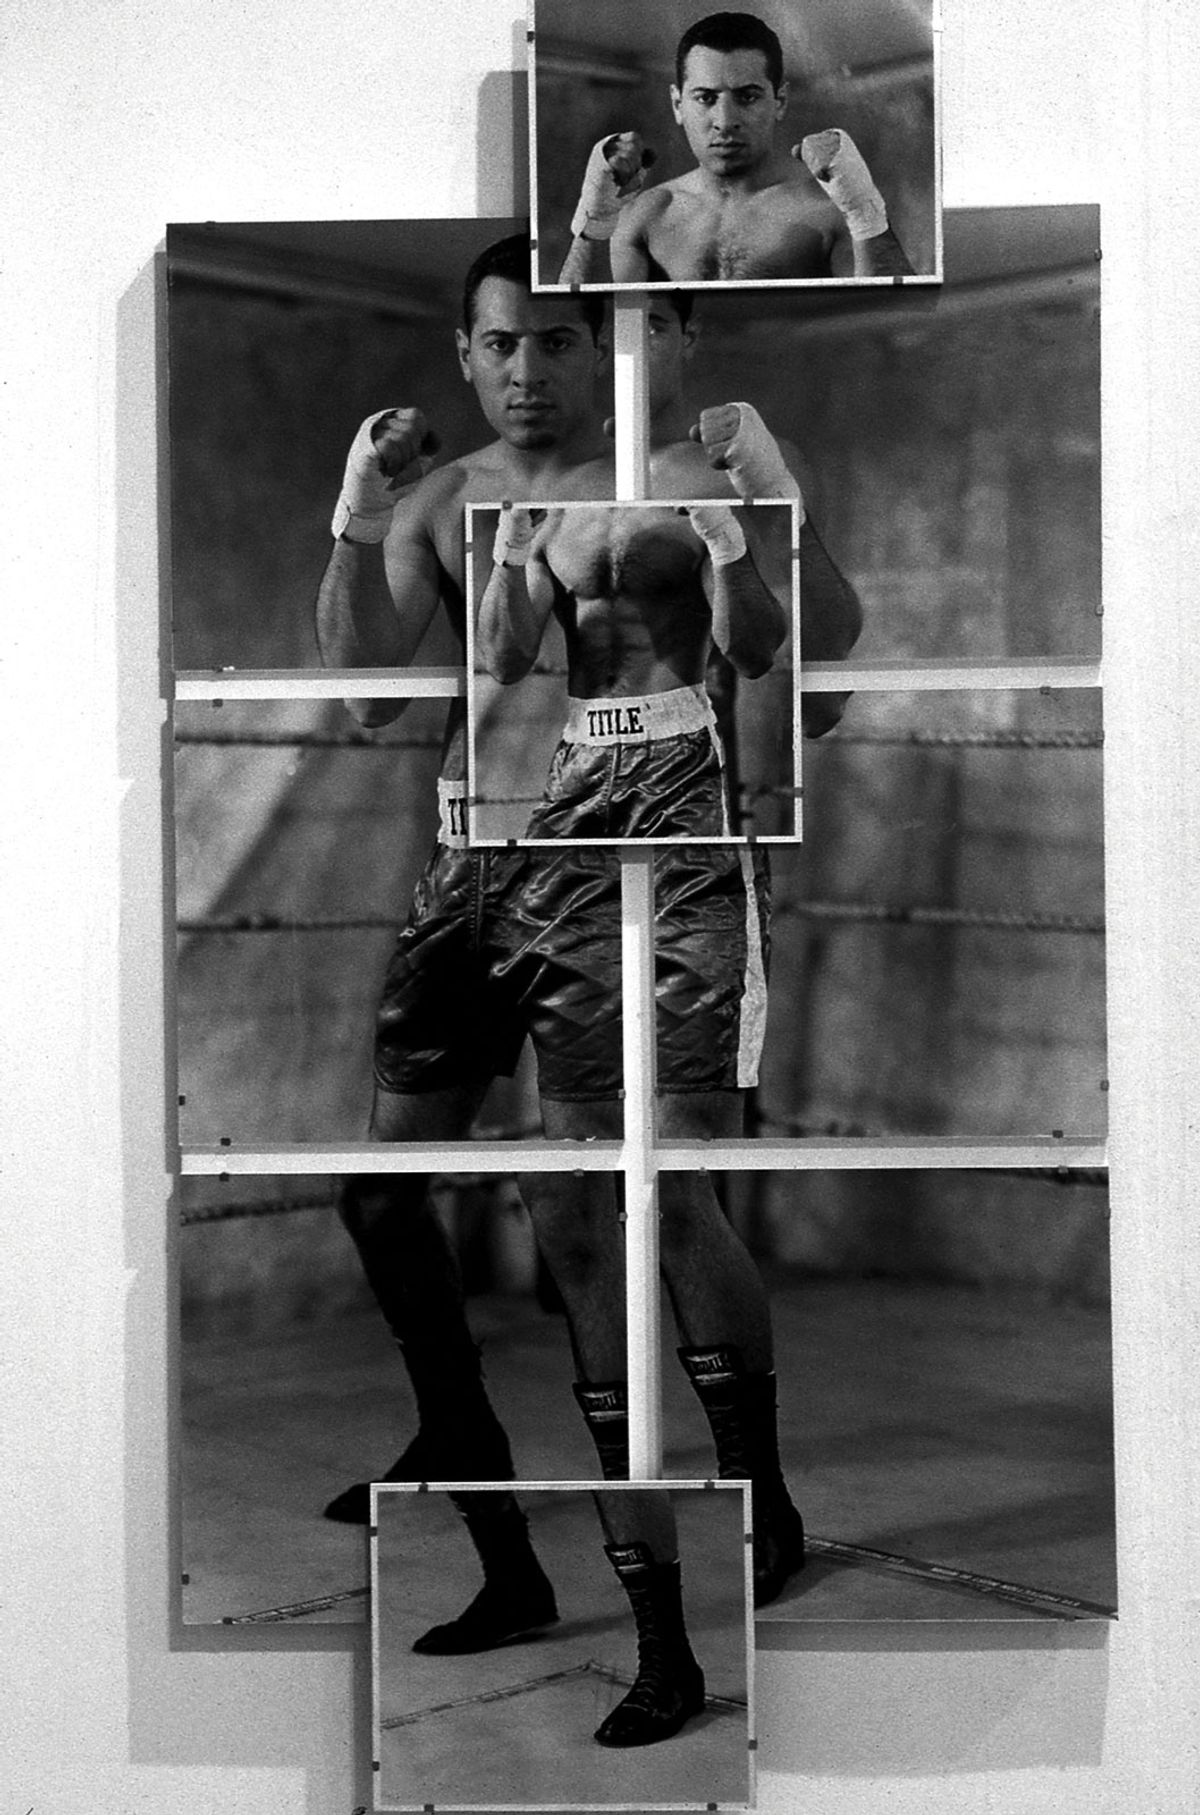 Knockout artist: a detail from Ingrid Pollard’s 1995 installation titled Contenders, a larger work that explores notions of masculinity and the male body Courtesy Ingrid Pollard